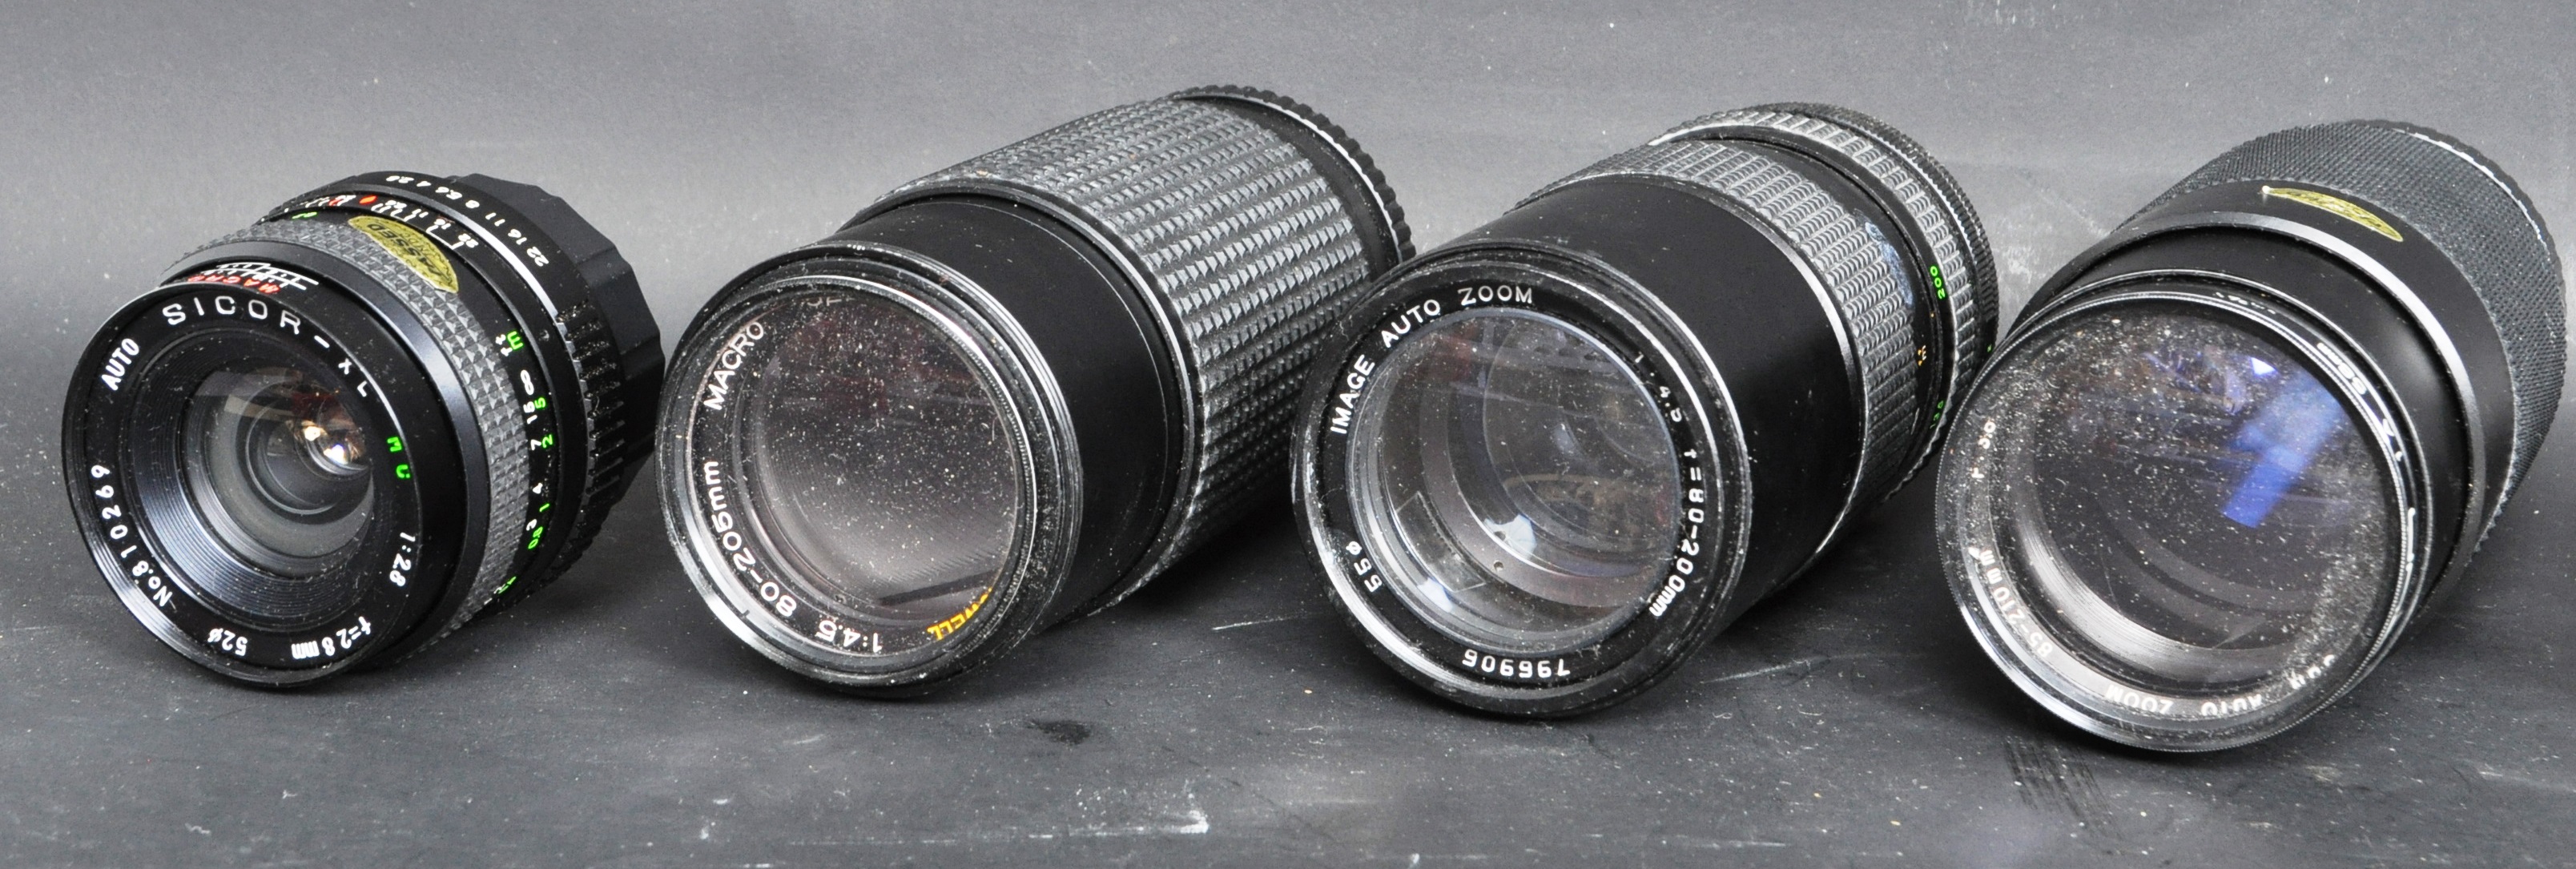 COLLECTION OF VINTAGE PHOTOGRAPHIC CAMERA LENSES - Image 2 of 5